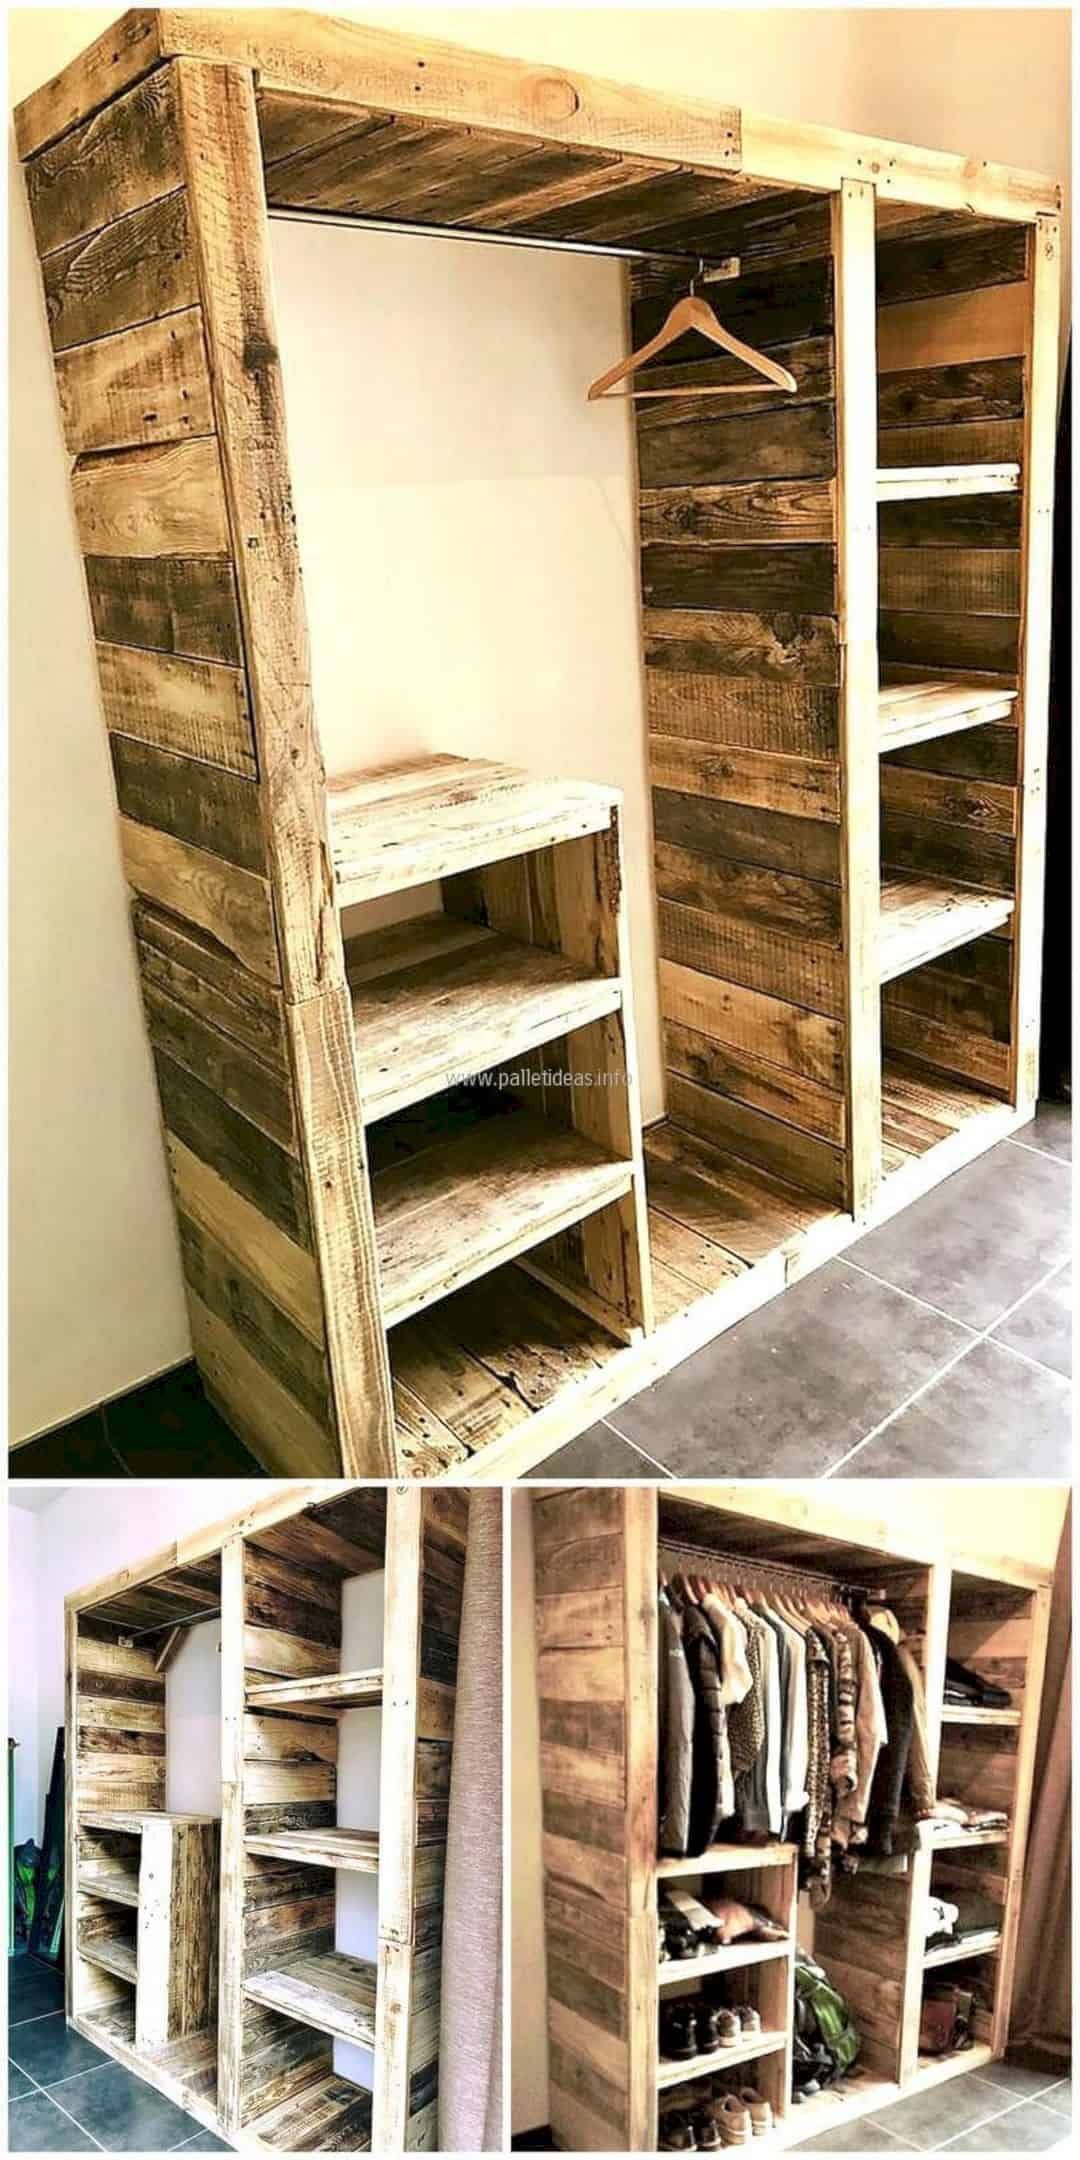 12 Inspirations of Easy DIY Furniture Hacks for Your Home Interior | Futurist Architecture - 12 Inspirations of Easy DIY Furniture Hacks for Your Home Interior | Futurist Architecture -   14 diy Muebles ropa ideas